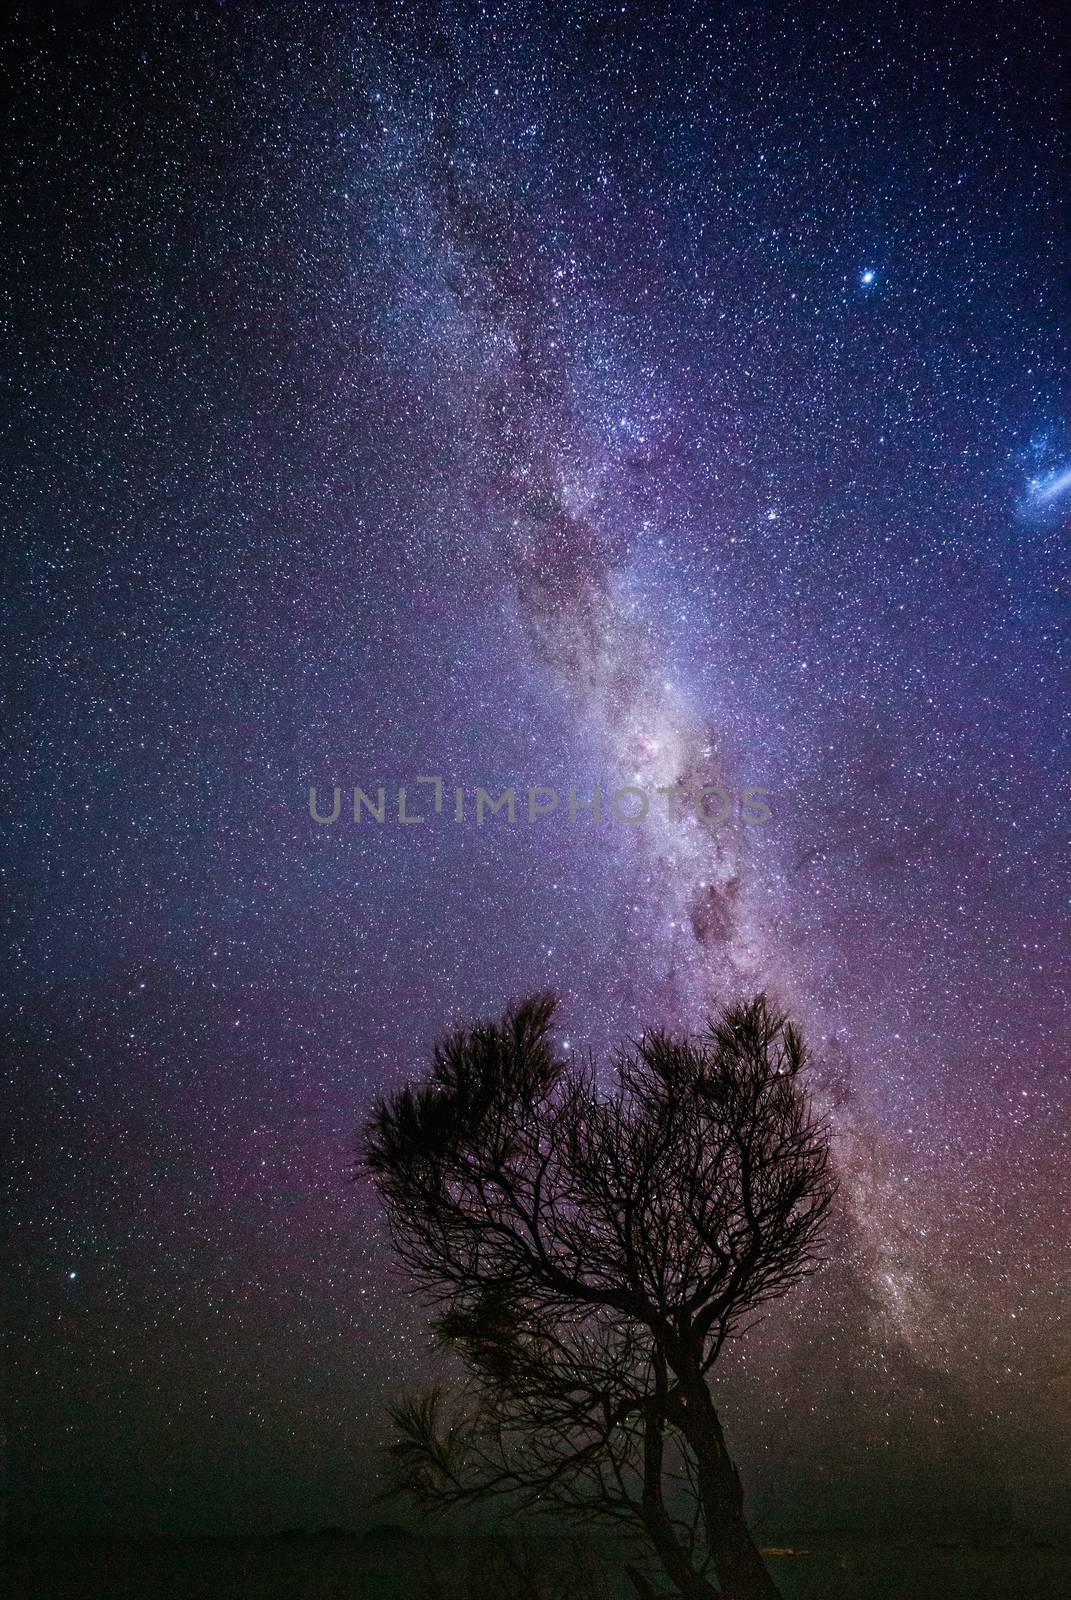 Quiet nights under a sky full of stars shining brightly from a small dark precipice above the ocean.  Lone tree silhouetted against the backdrop of so many stars and planets twinkling overhead